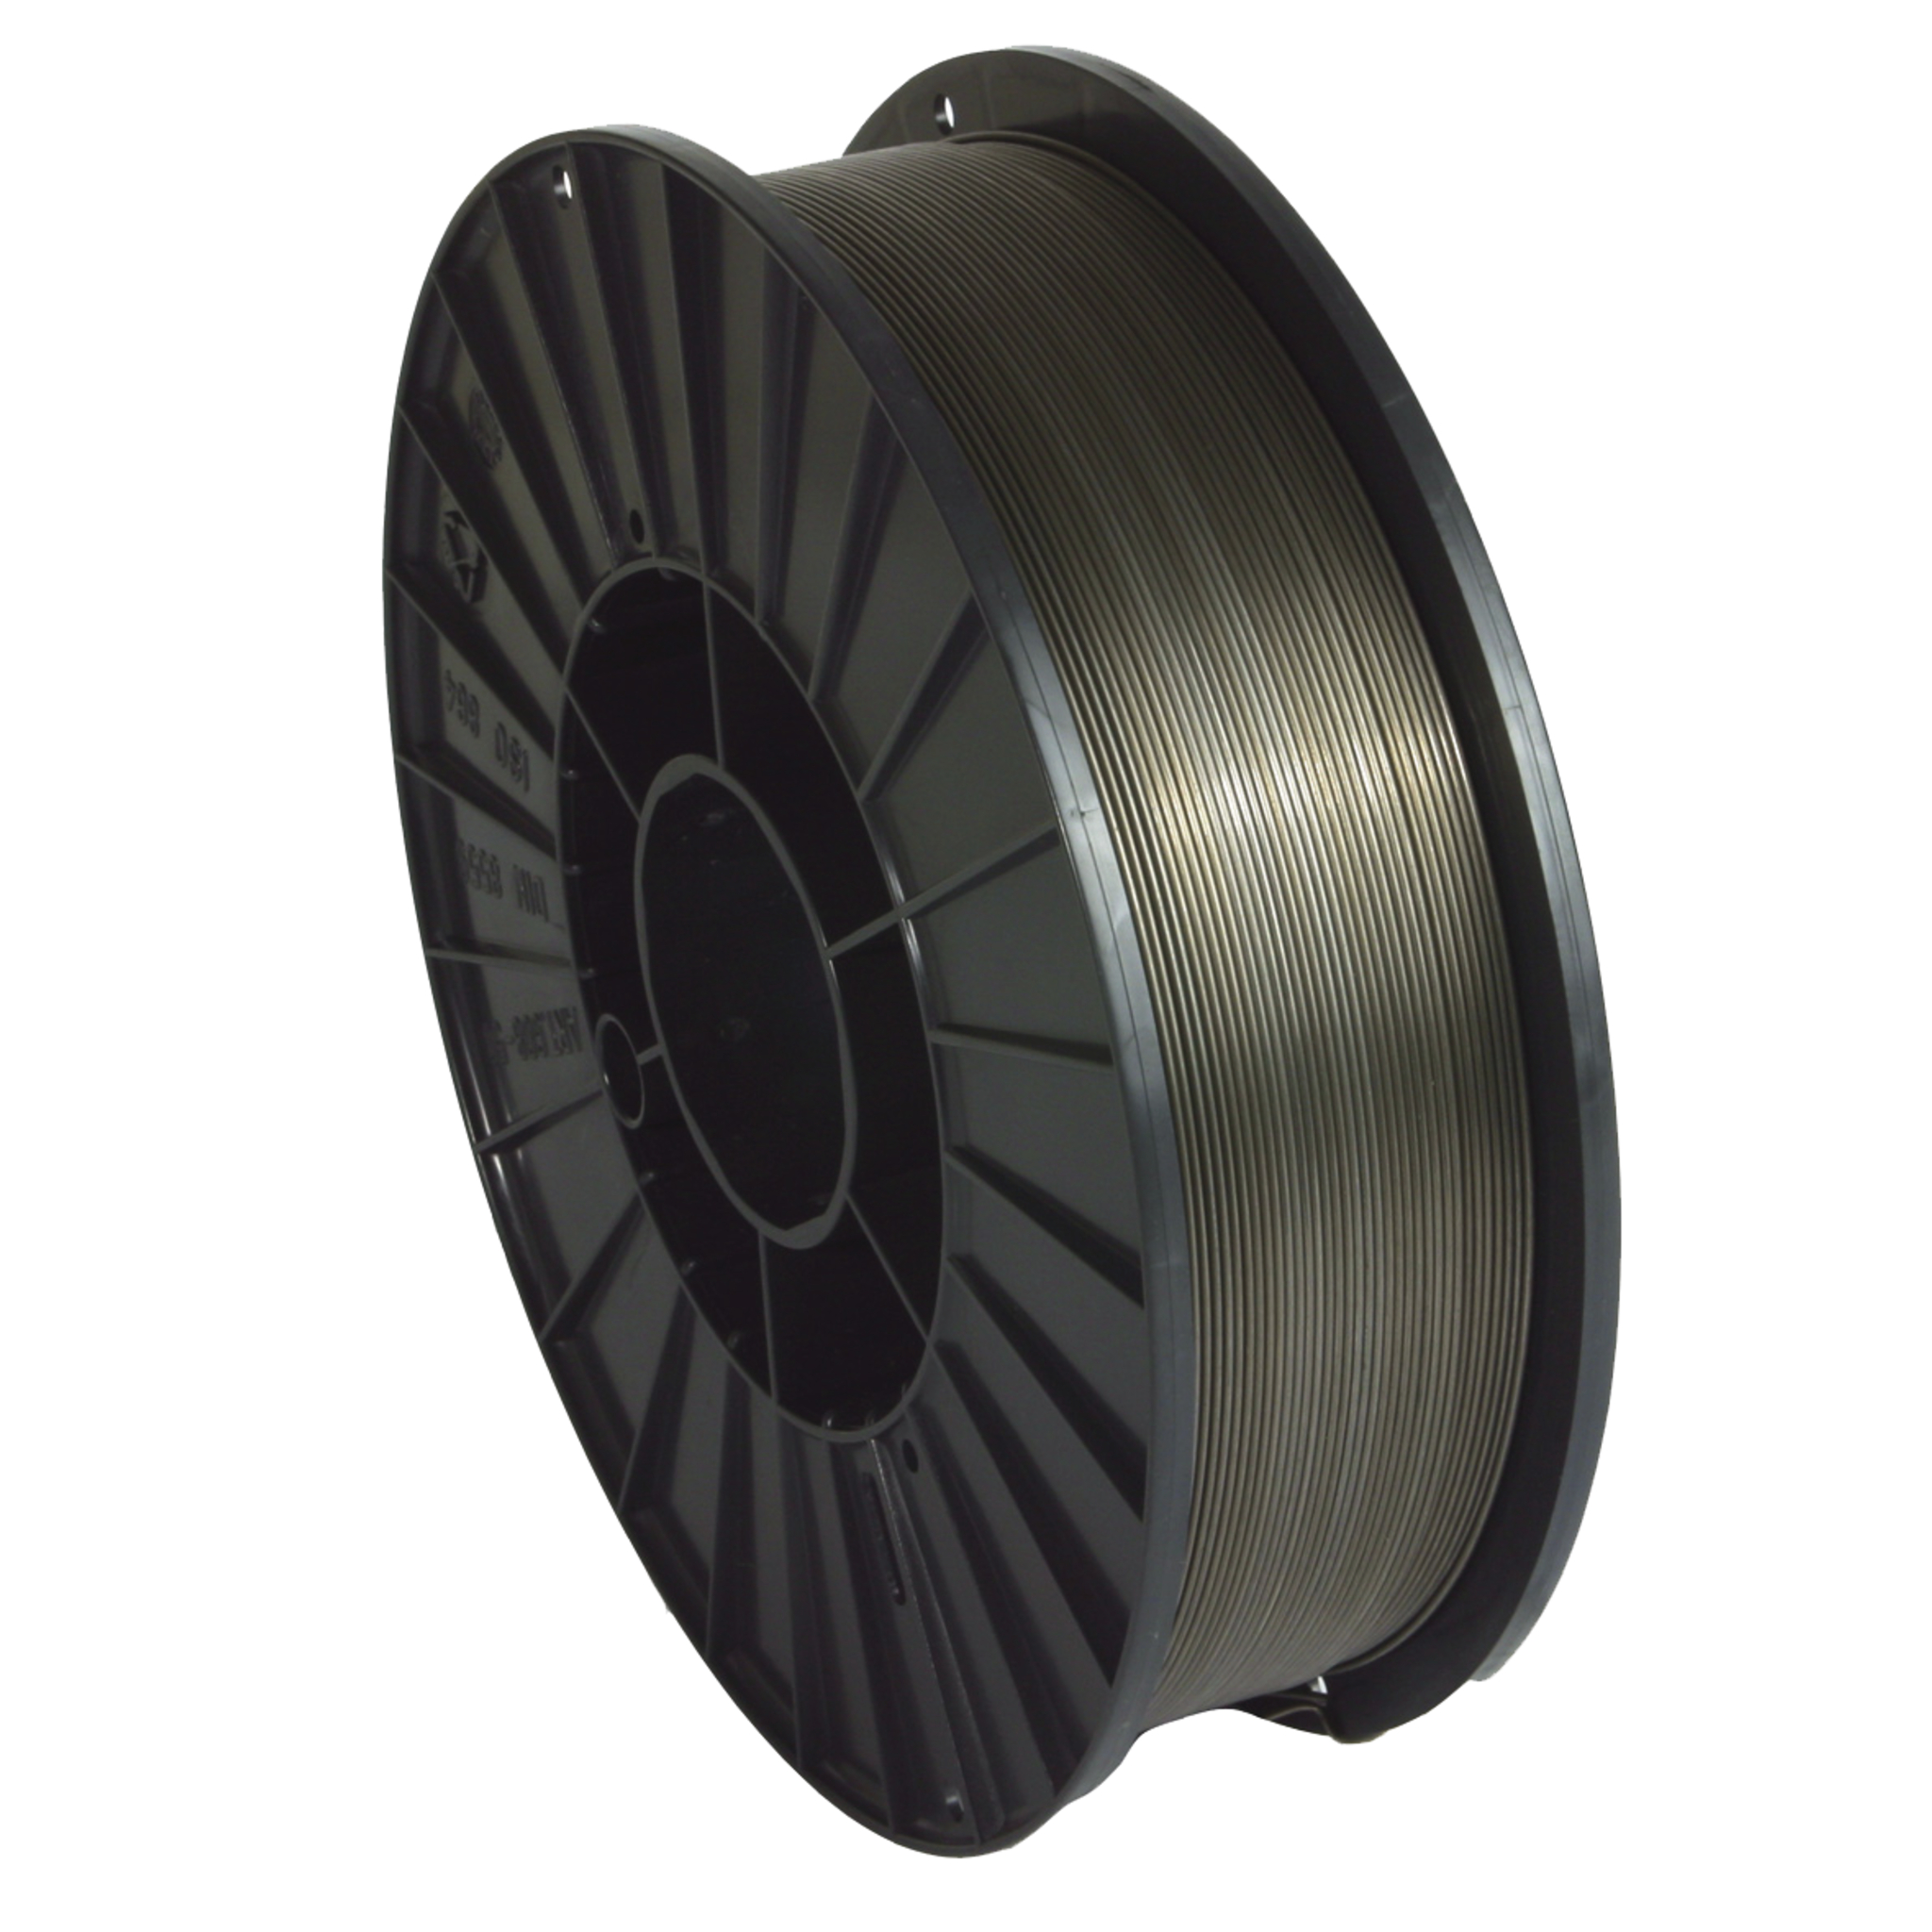 Cored wire reel